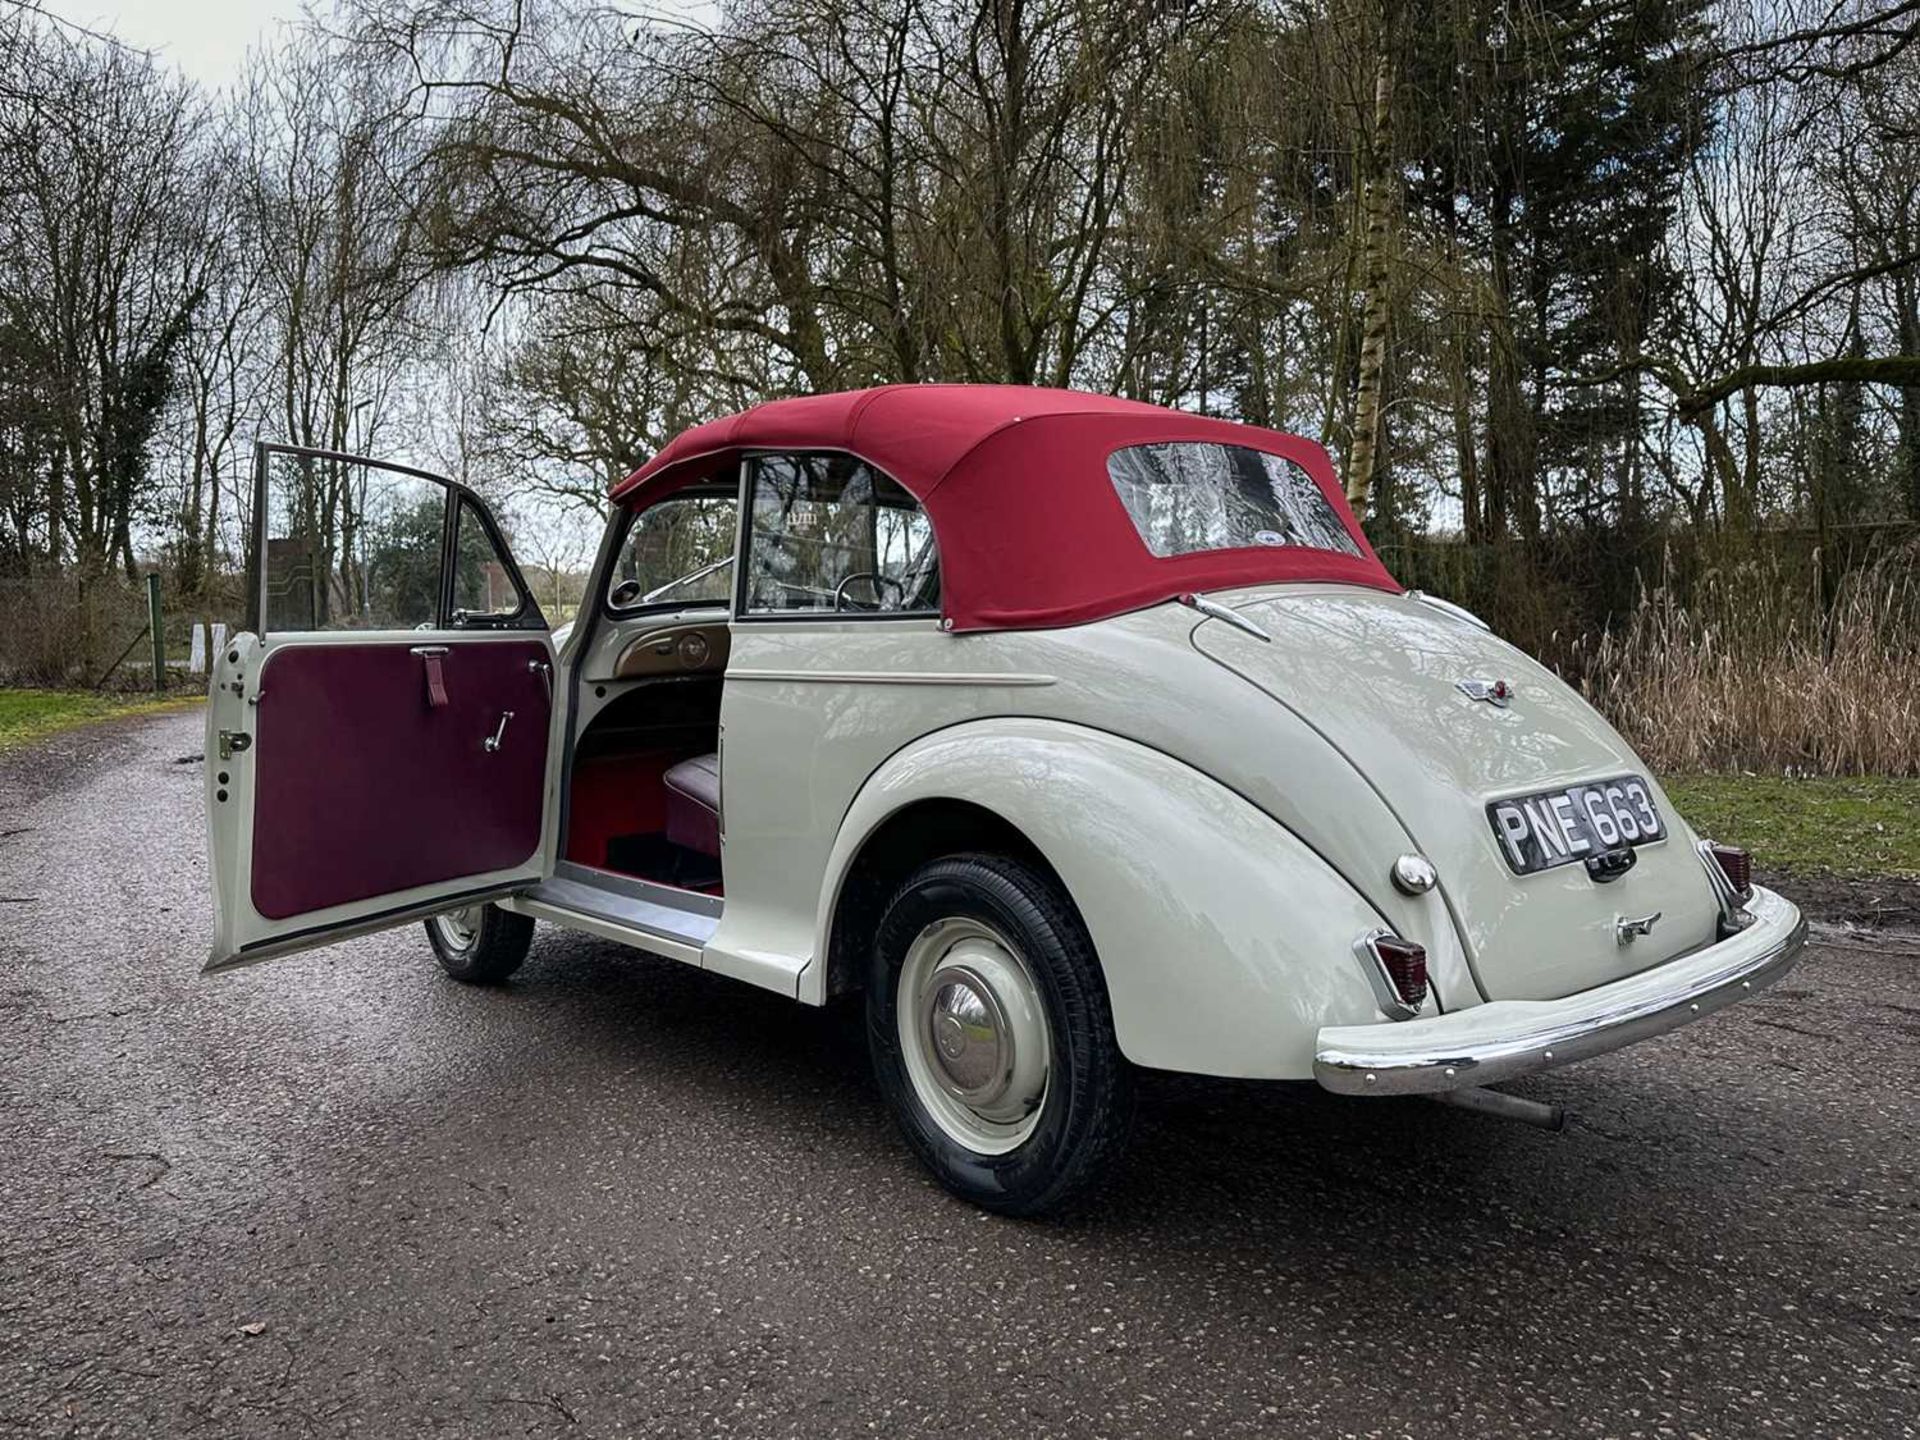 1954 Morris Minor Tourer Fully restored to concours standard - Image 37 of 100